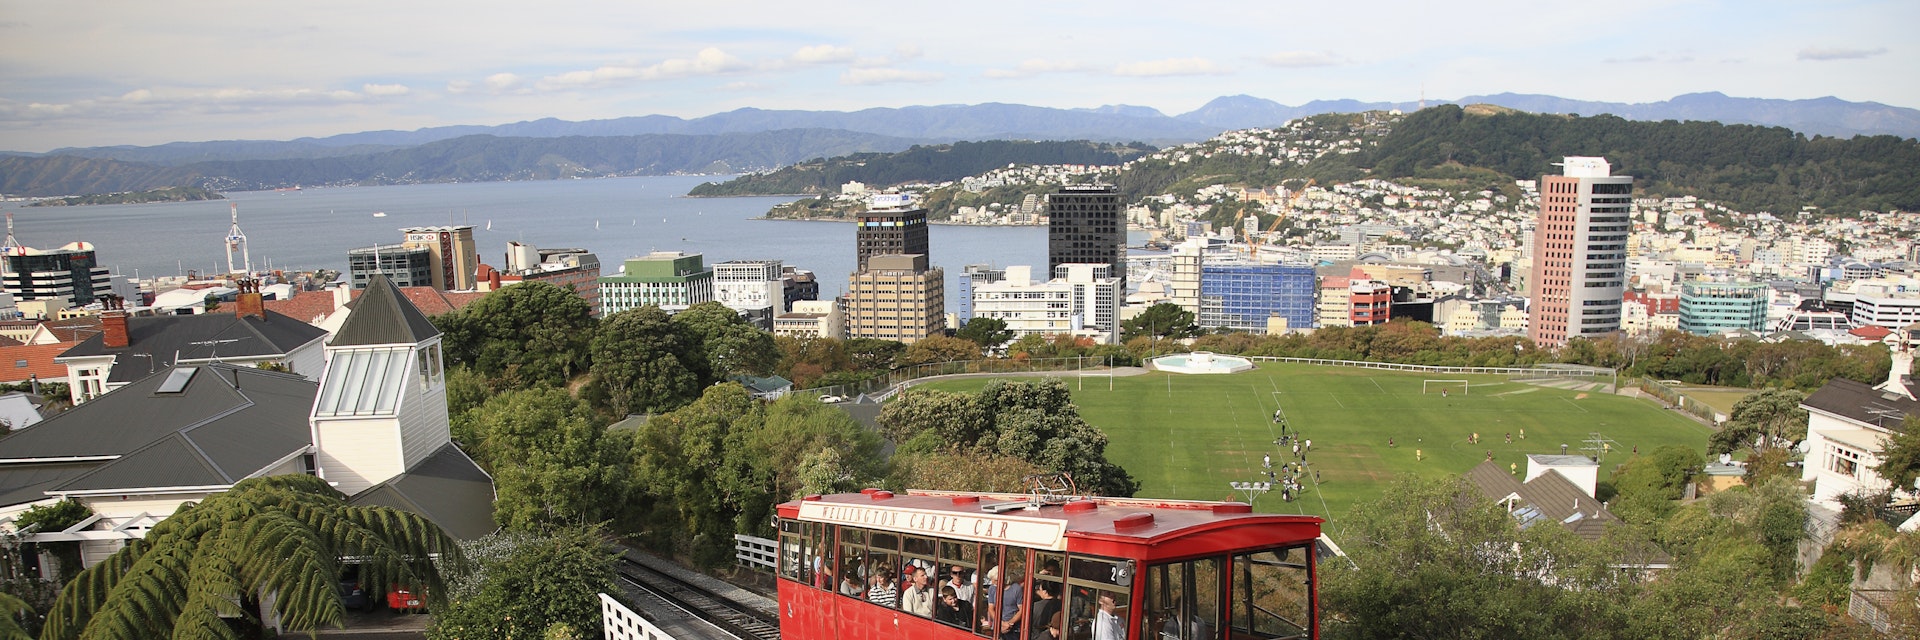 Cable Car and view over Wellington city and harbour, Kelburn, Wellington, New Zealand